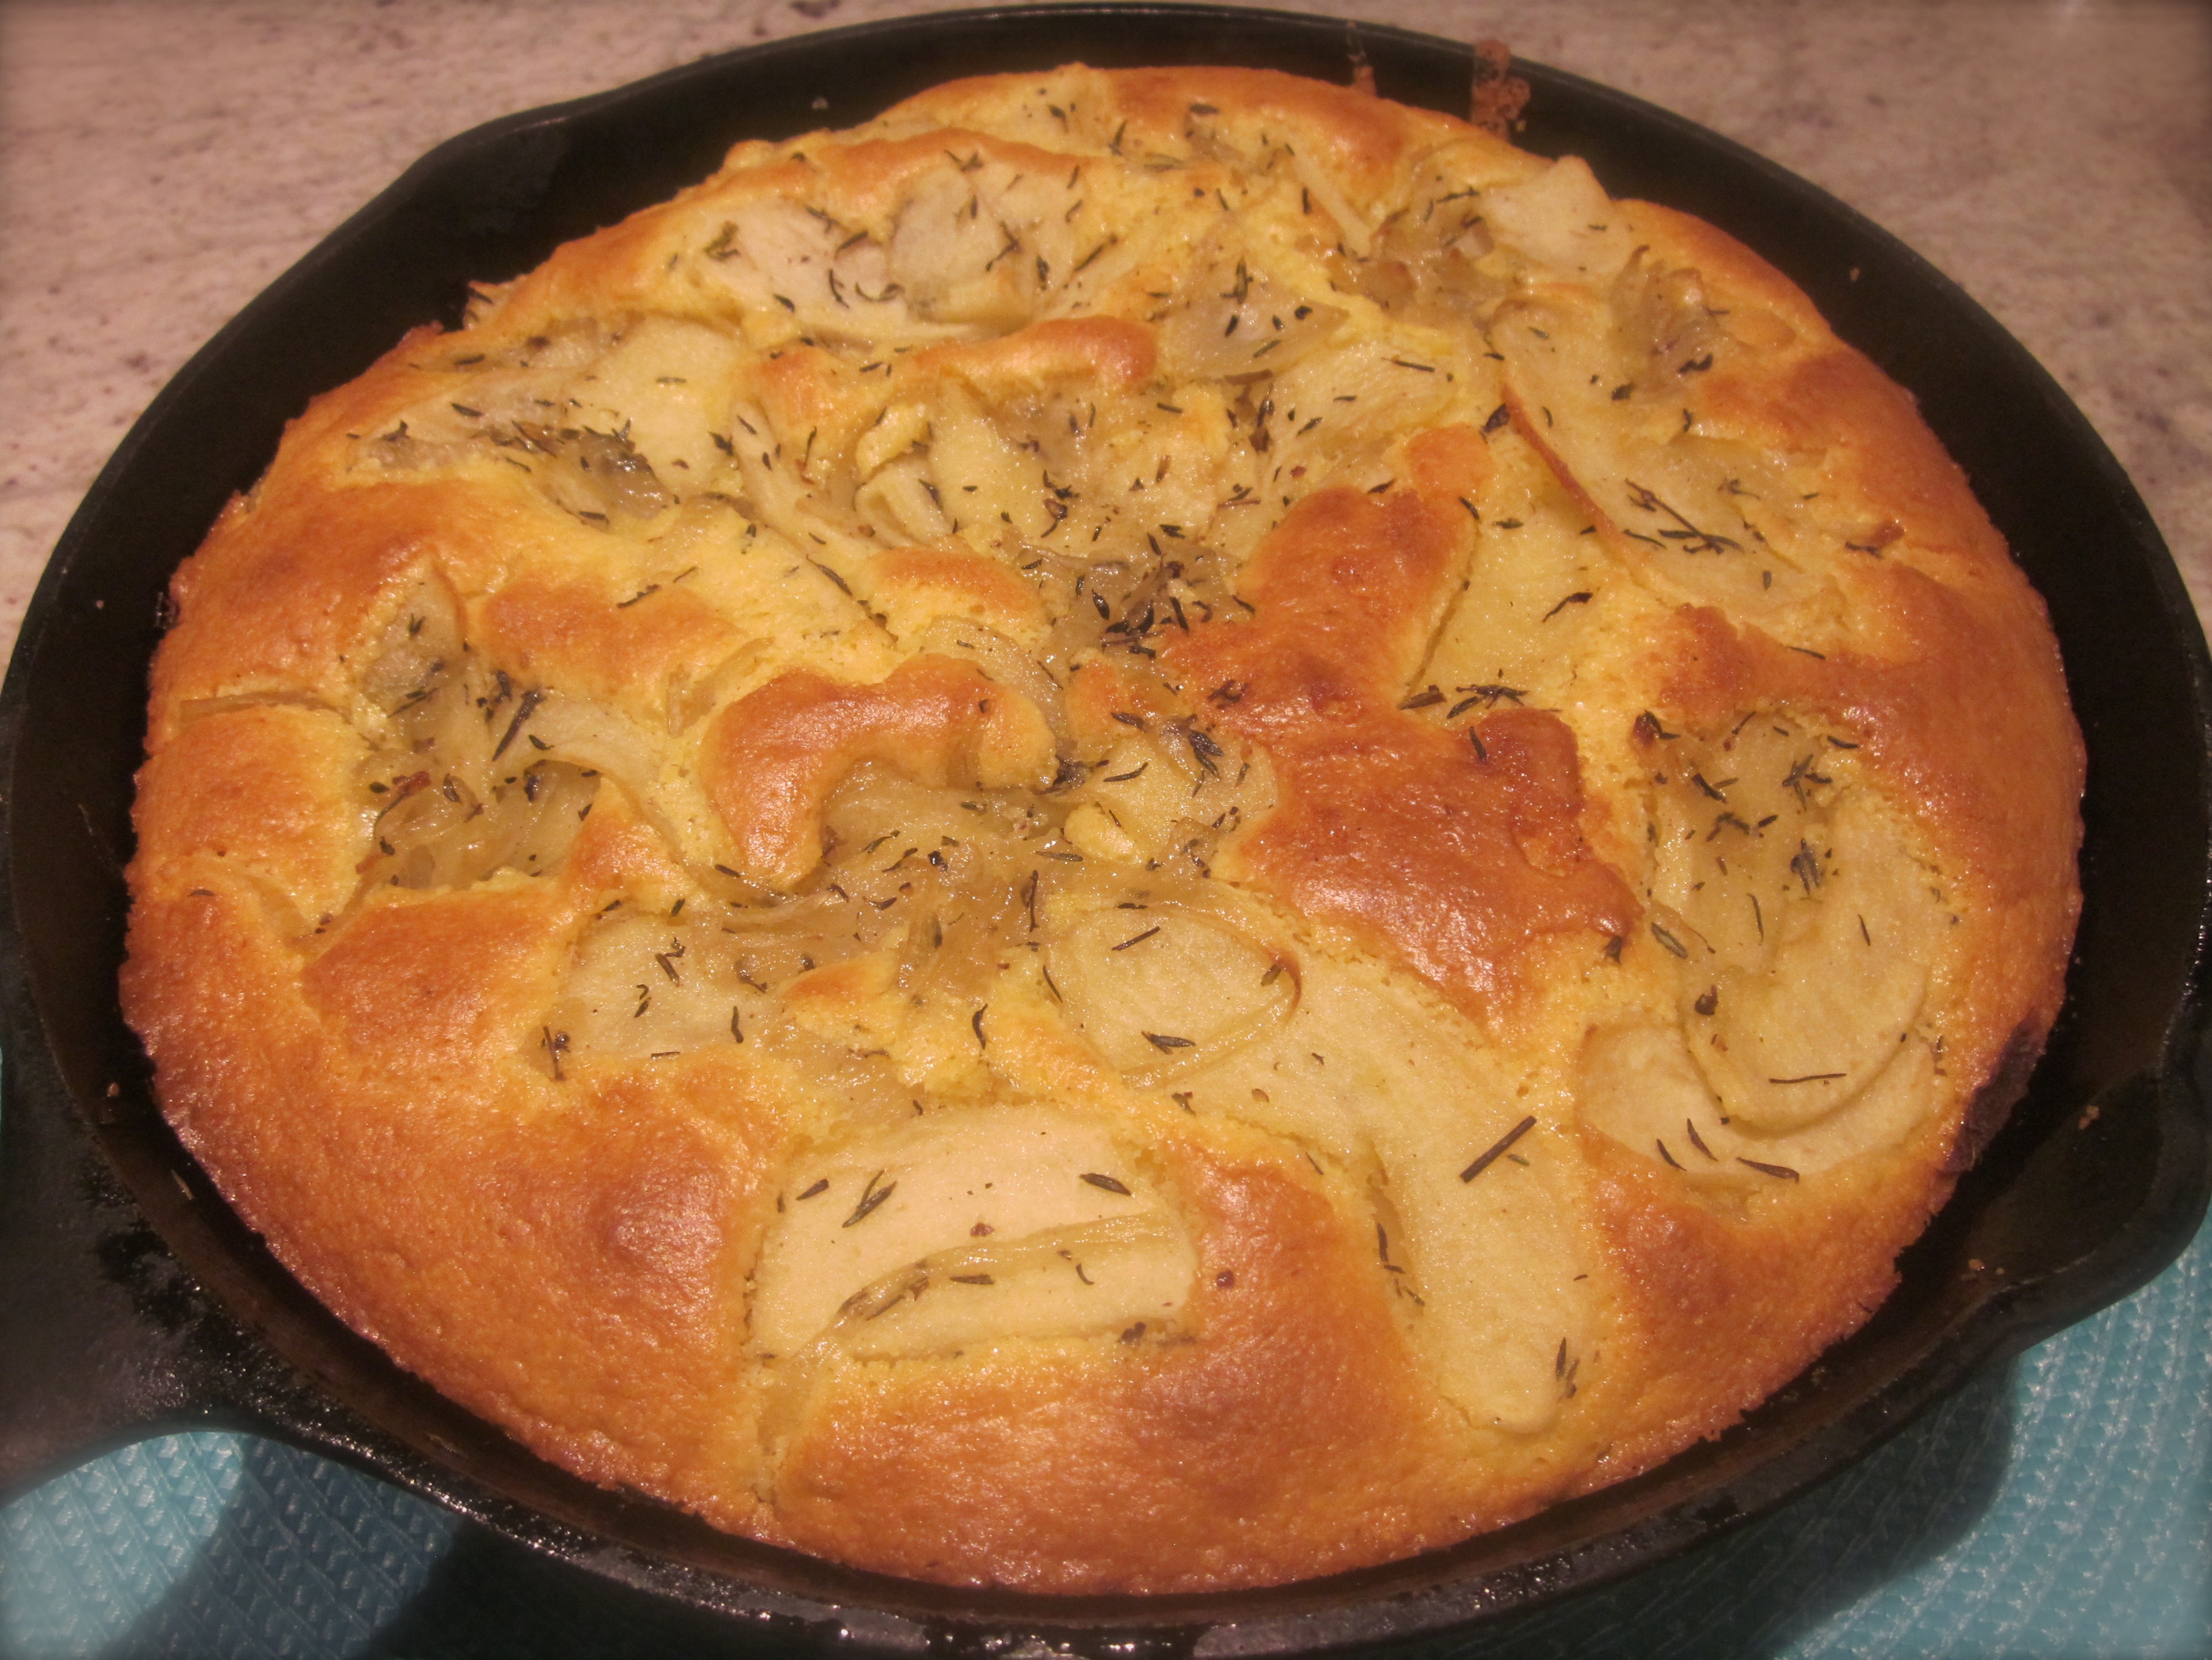 CORNBREAD WITH CARAMELIZED APPLES, ONIONS & THYME